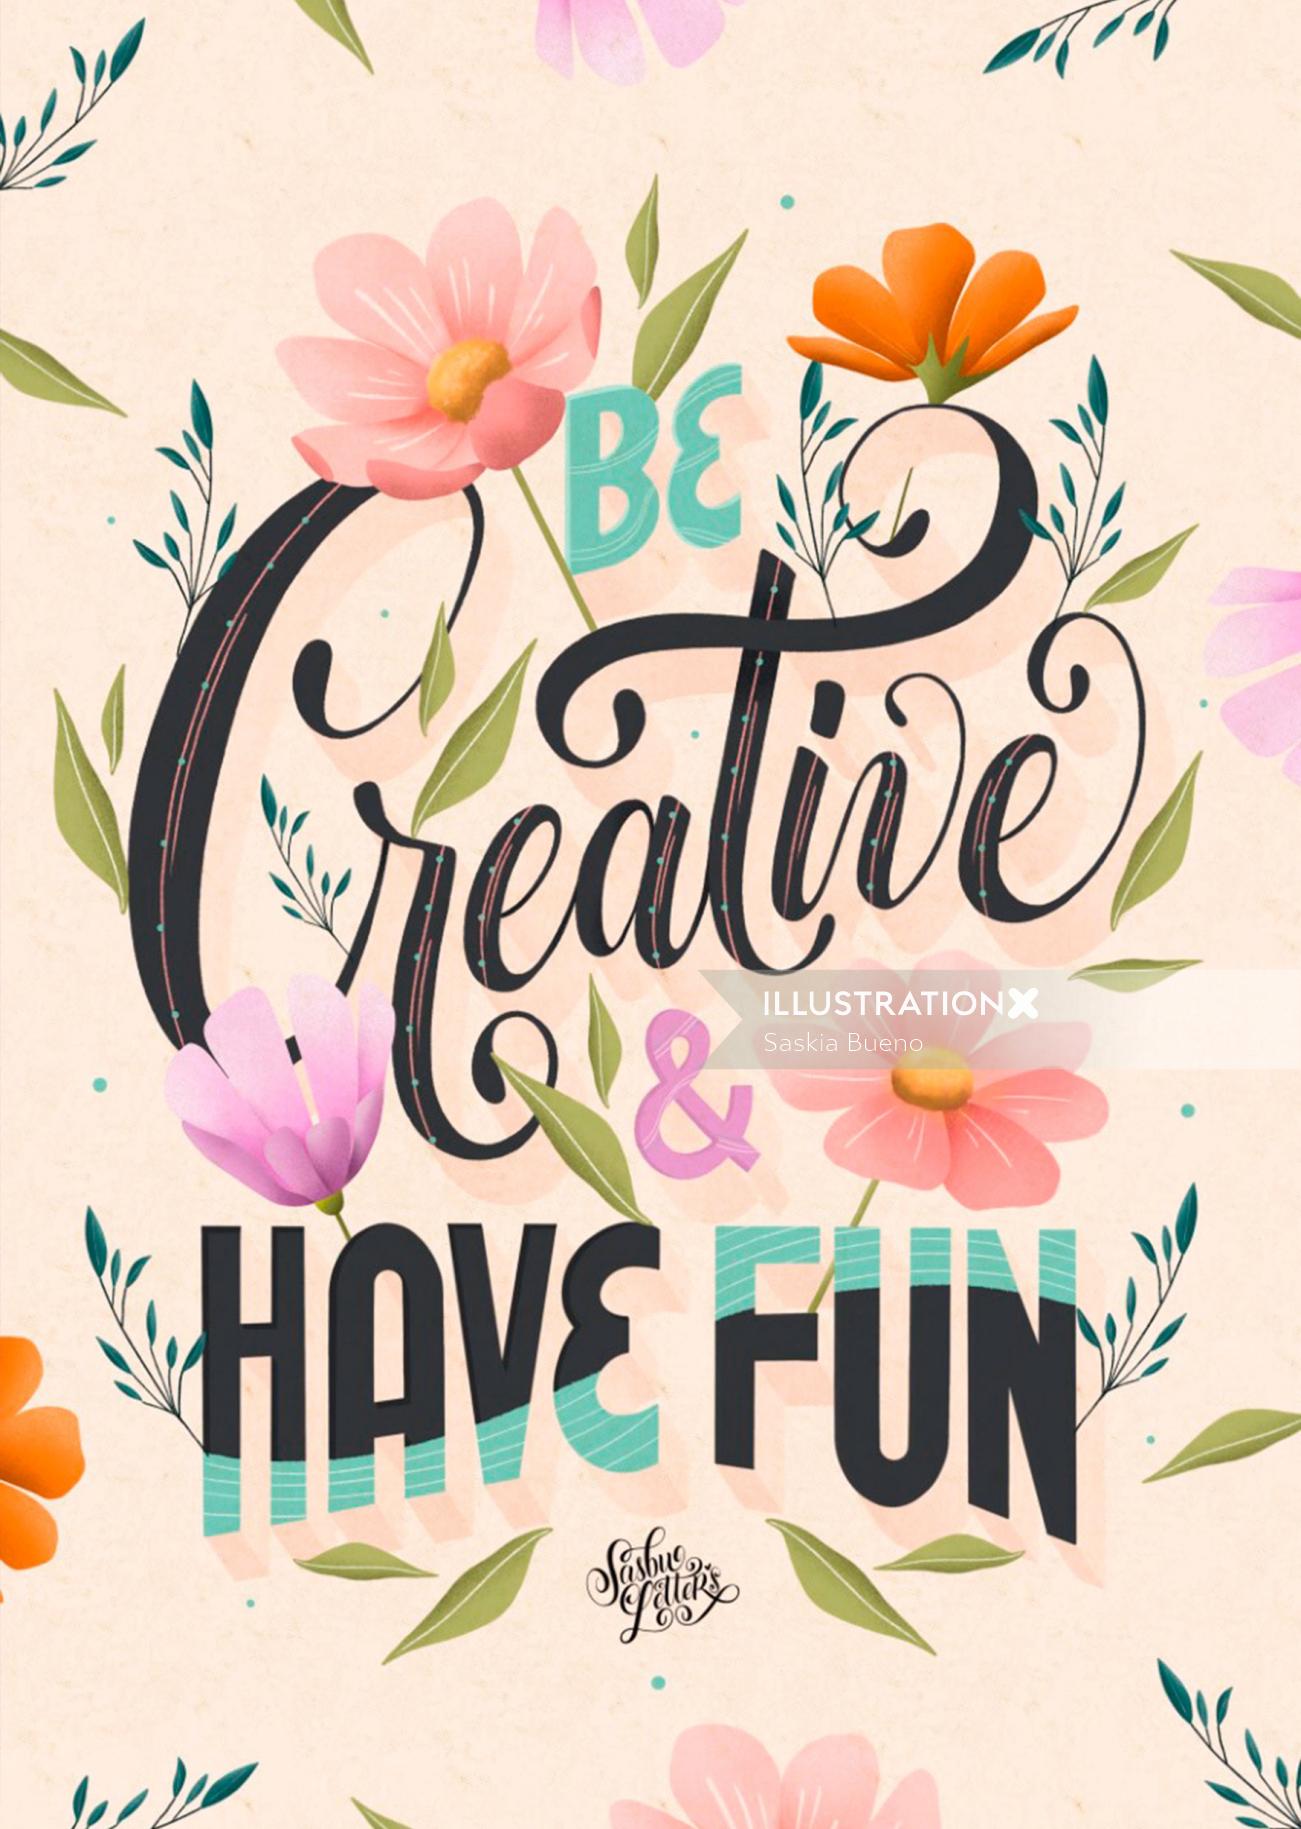 Lettering art of be creative & have fun